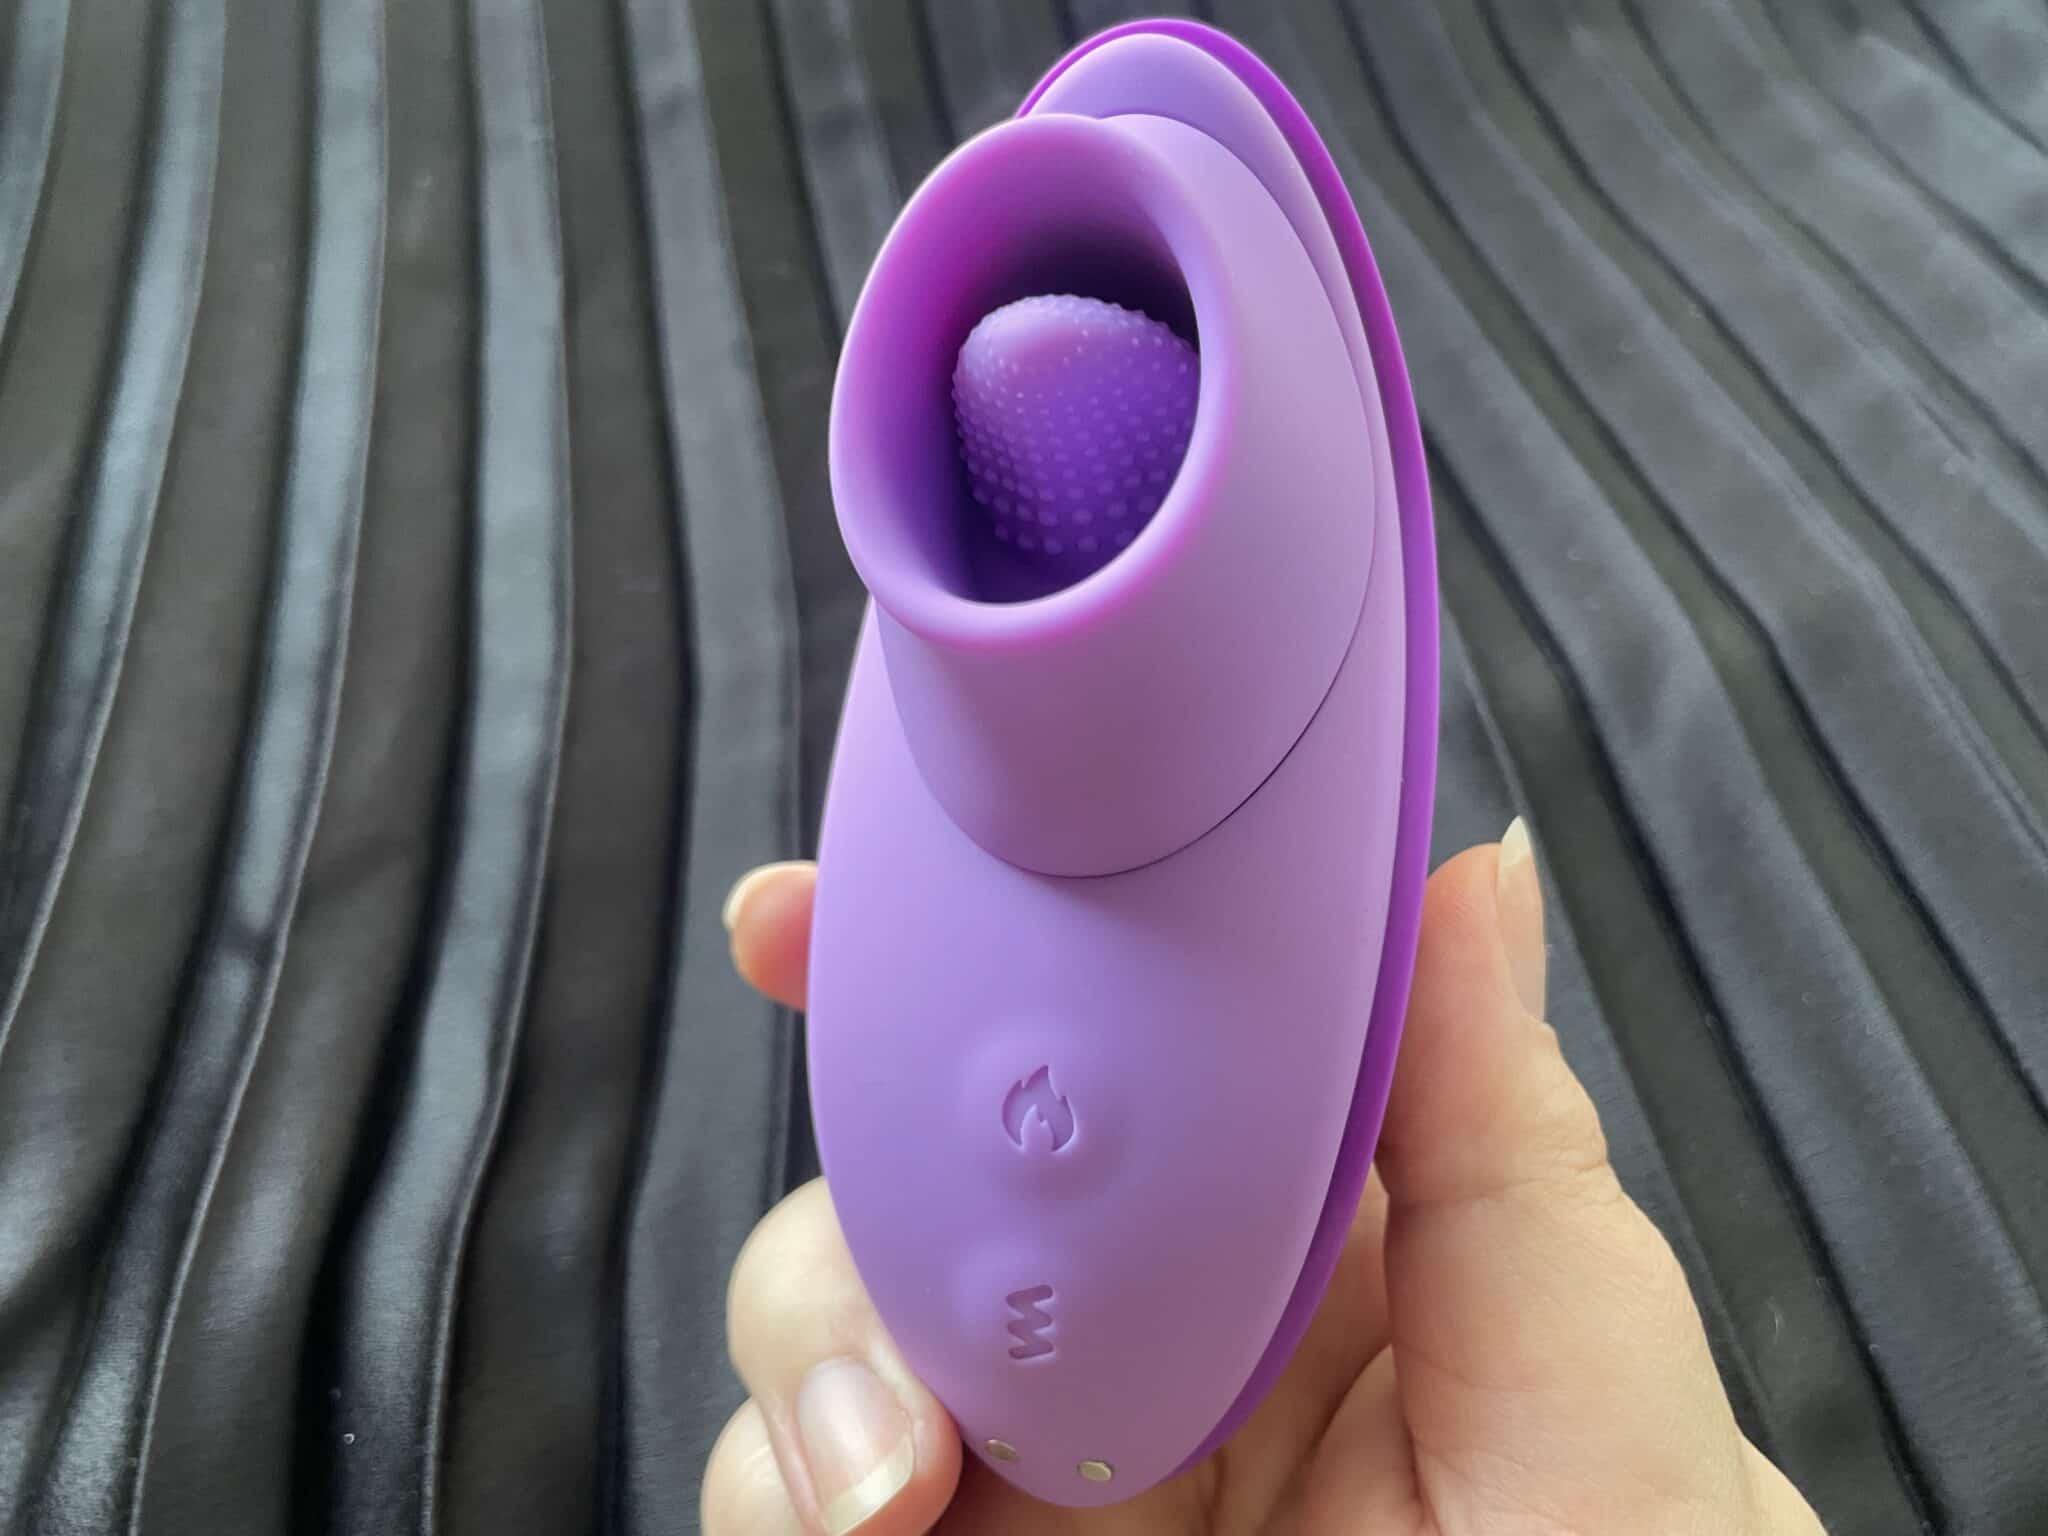 Fantasy For Her - Her Silicone Fun Tongue The Fantasy For Her - Her Silicone Fun Tongue: Balancing Quality and Cost